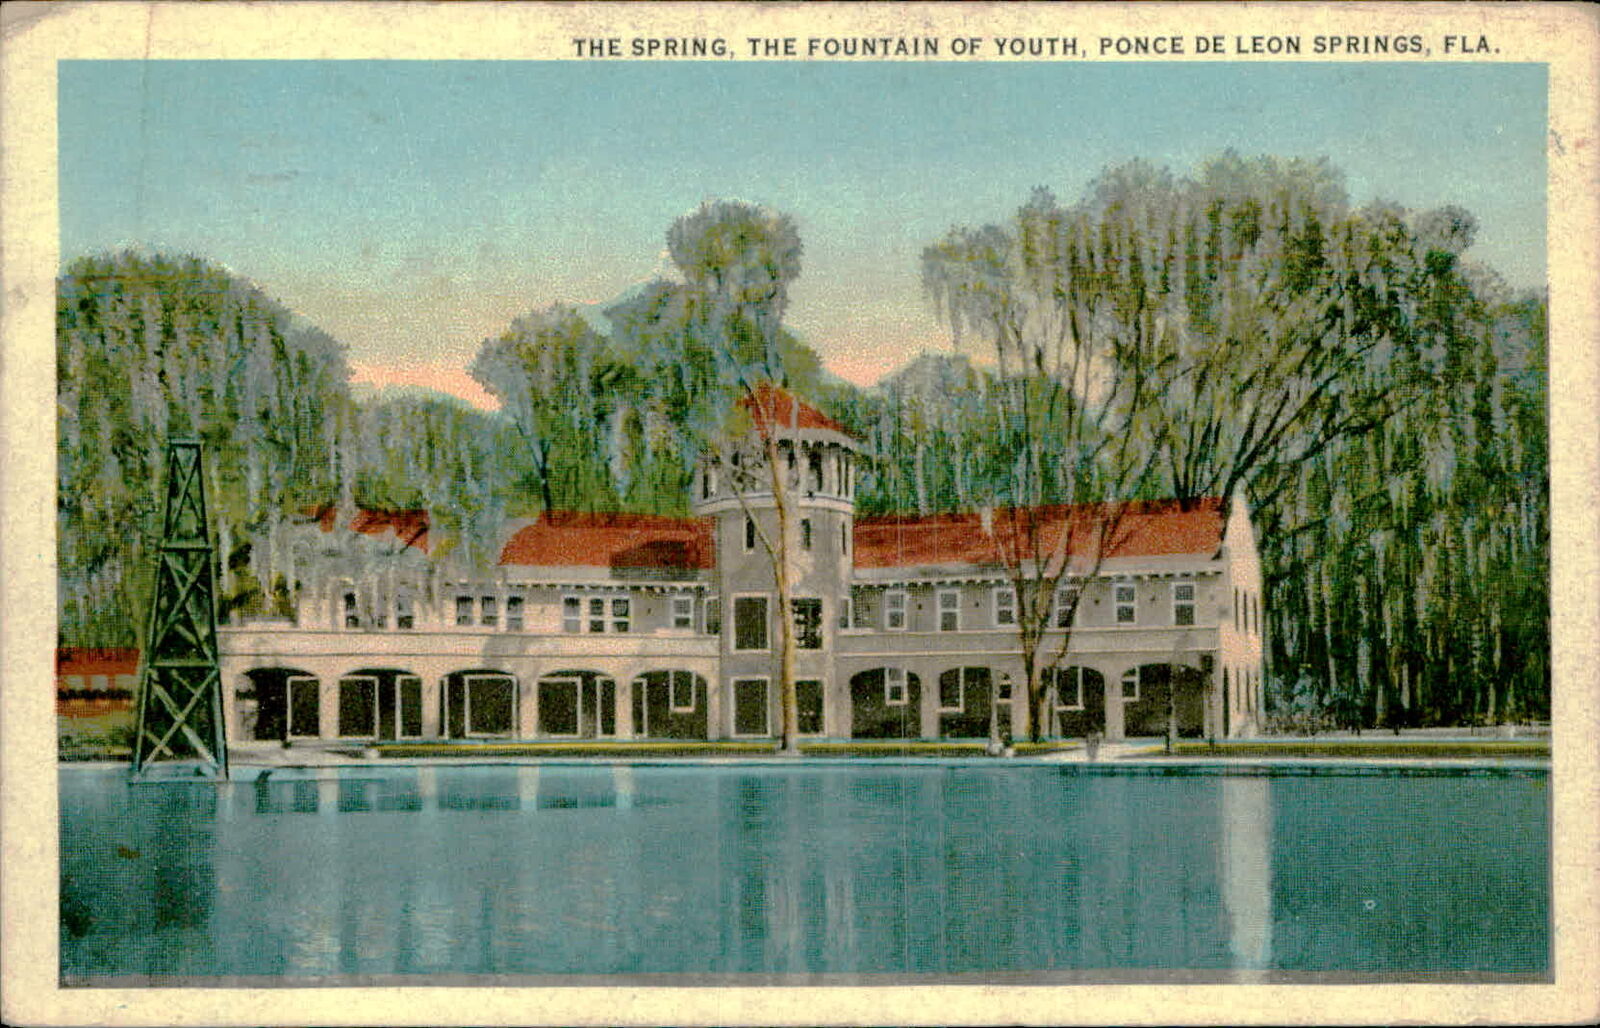 Postcard: THE SPRING, THE FOUNTAIN OF YOUTH, PONCE DE LEON SPRINGS, FL